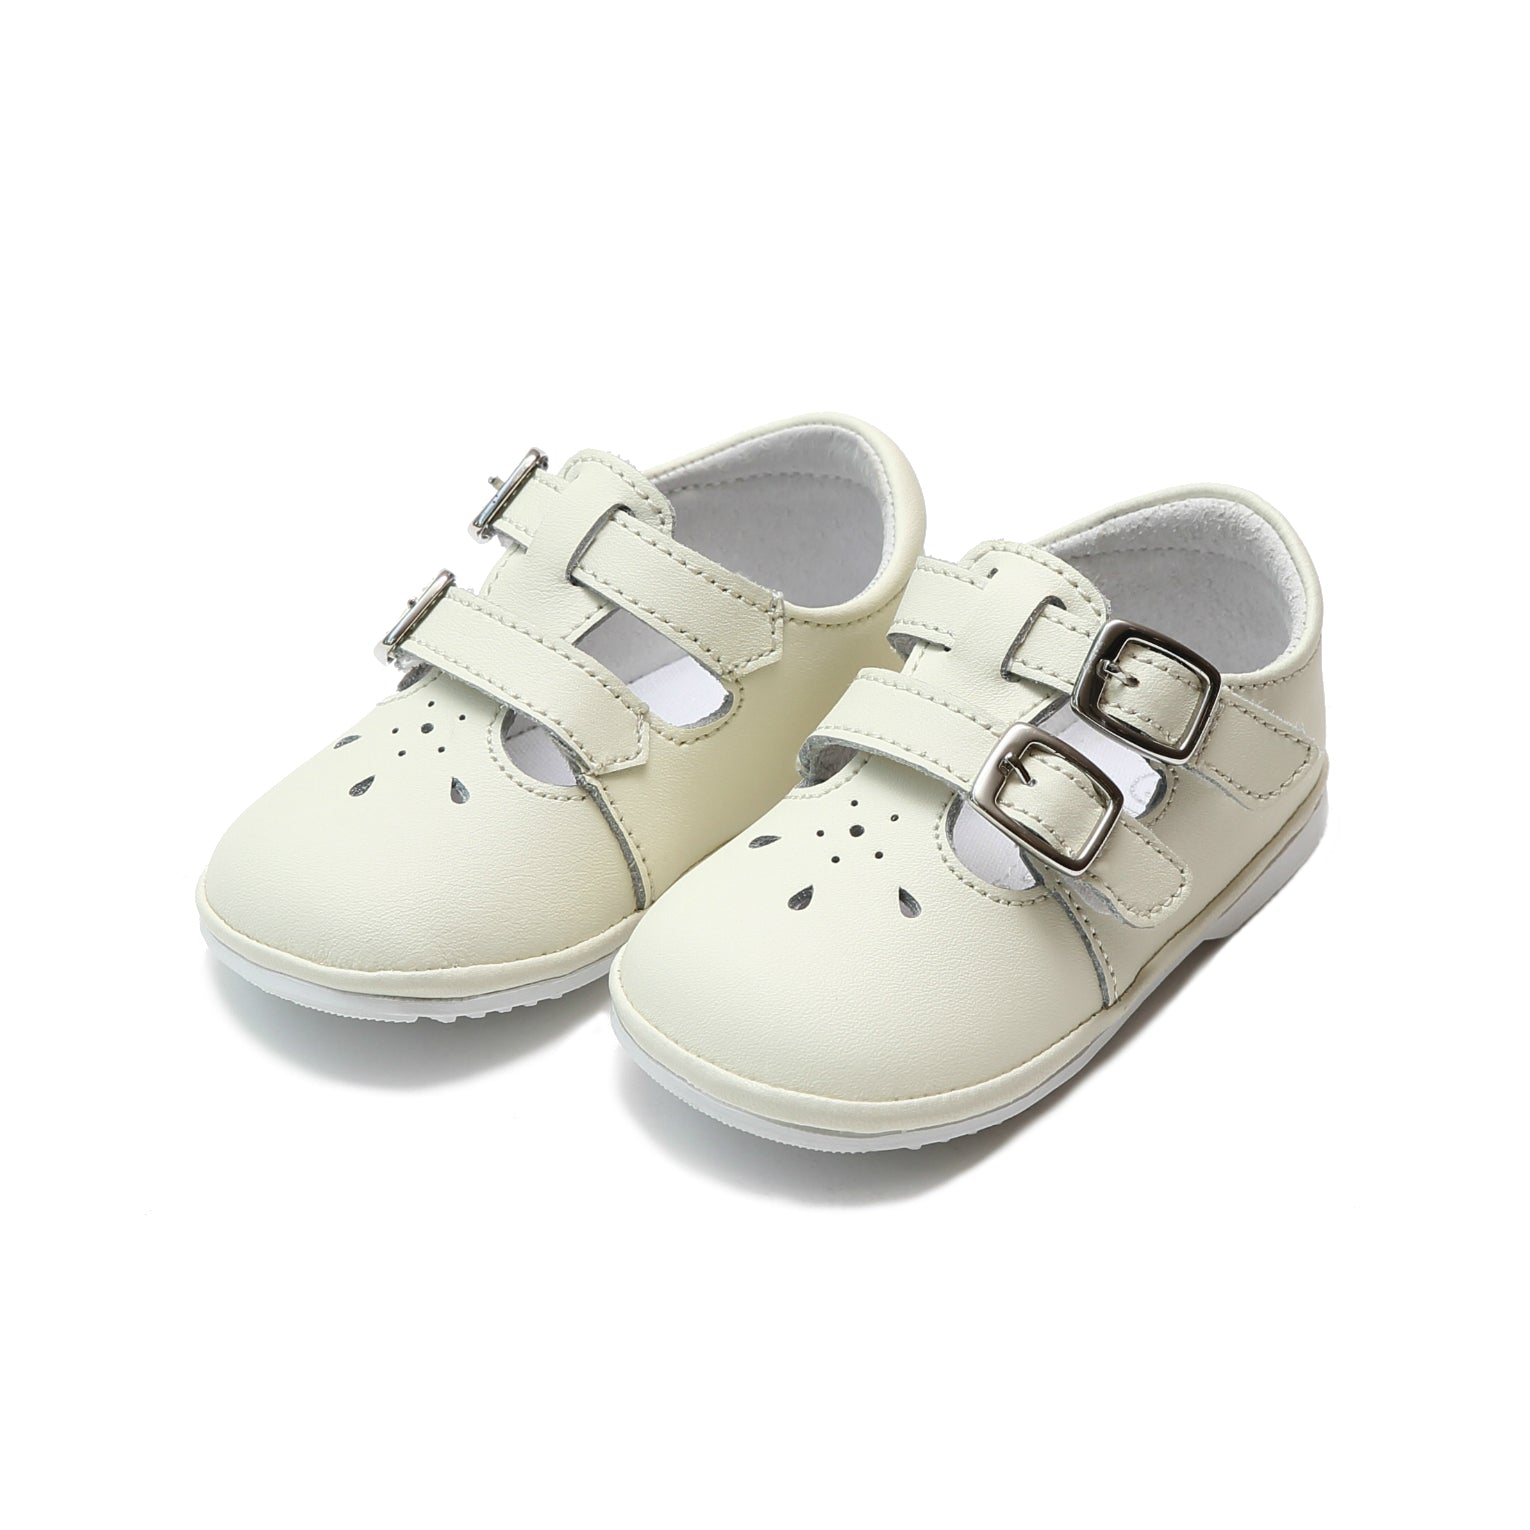 L'Amour Hattie Double Buckle Leather Mary Jane - Babies & Toddlers Mary Janes